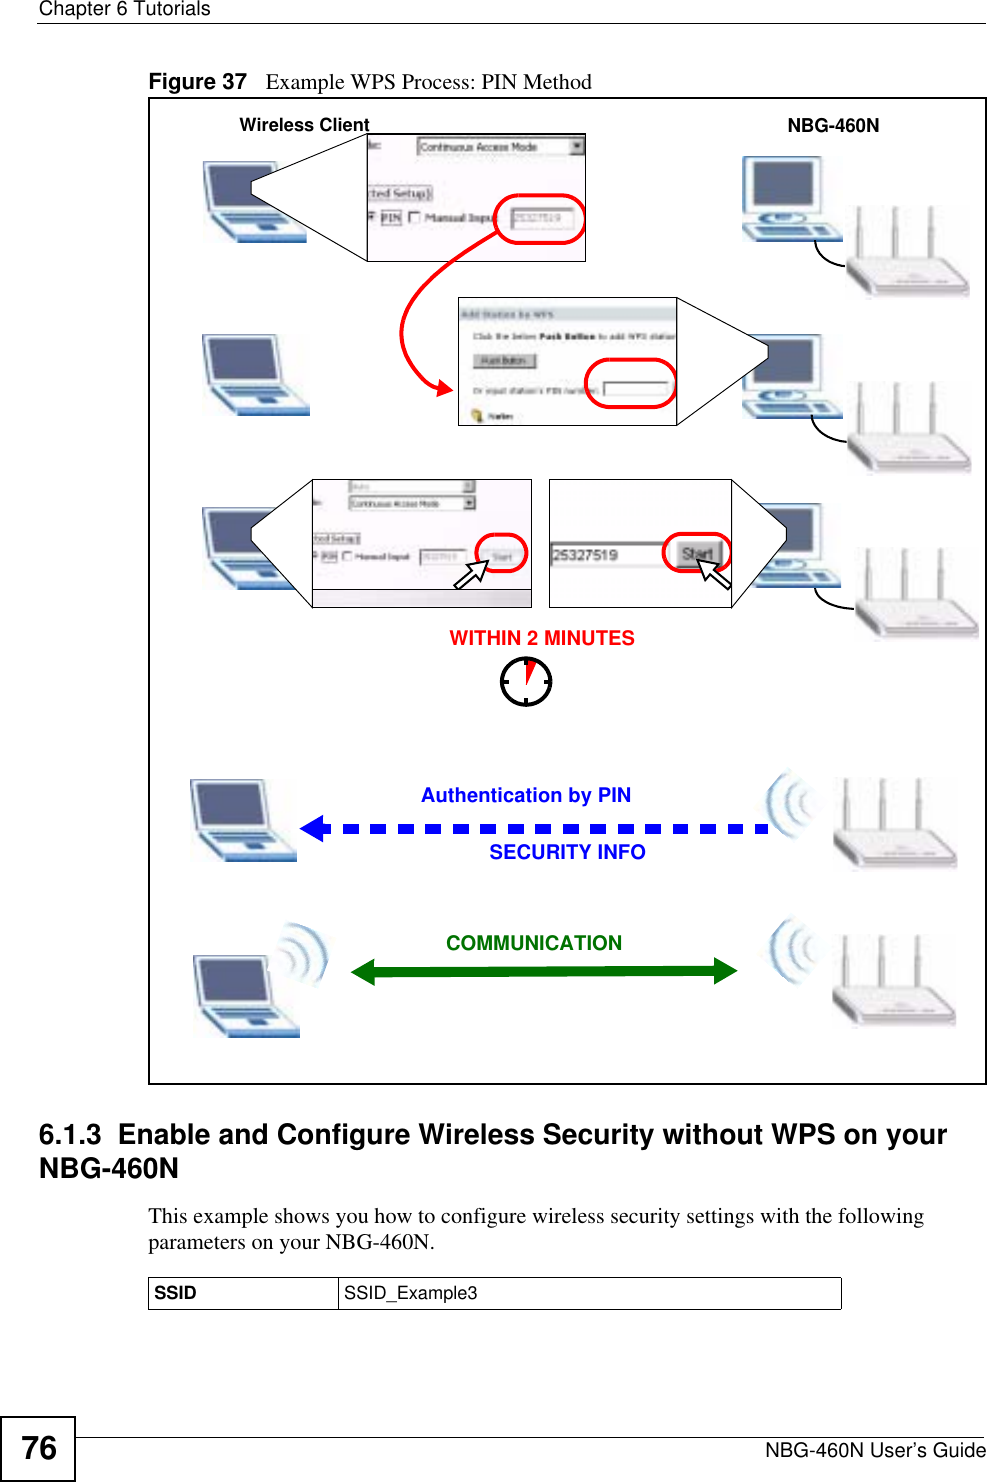 Chapter 6 TutorialsNBG-460N User’s Guide76Figure 37   Example WPS Process: PIN Method6.1.3  Enable and Configure Wireless Security without WPS on your NBG-460NThis example shows you how to configure wireless security settings with the following parameters on your NBG-460N.Authentication by PINSECURITY INFOWITHIN 2 MINUTESWireless ClientNBG-460NCOMMUNICATIONSSID SSID_Example3